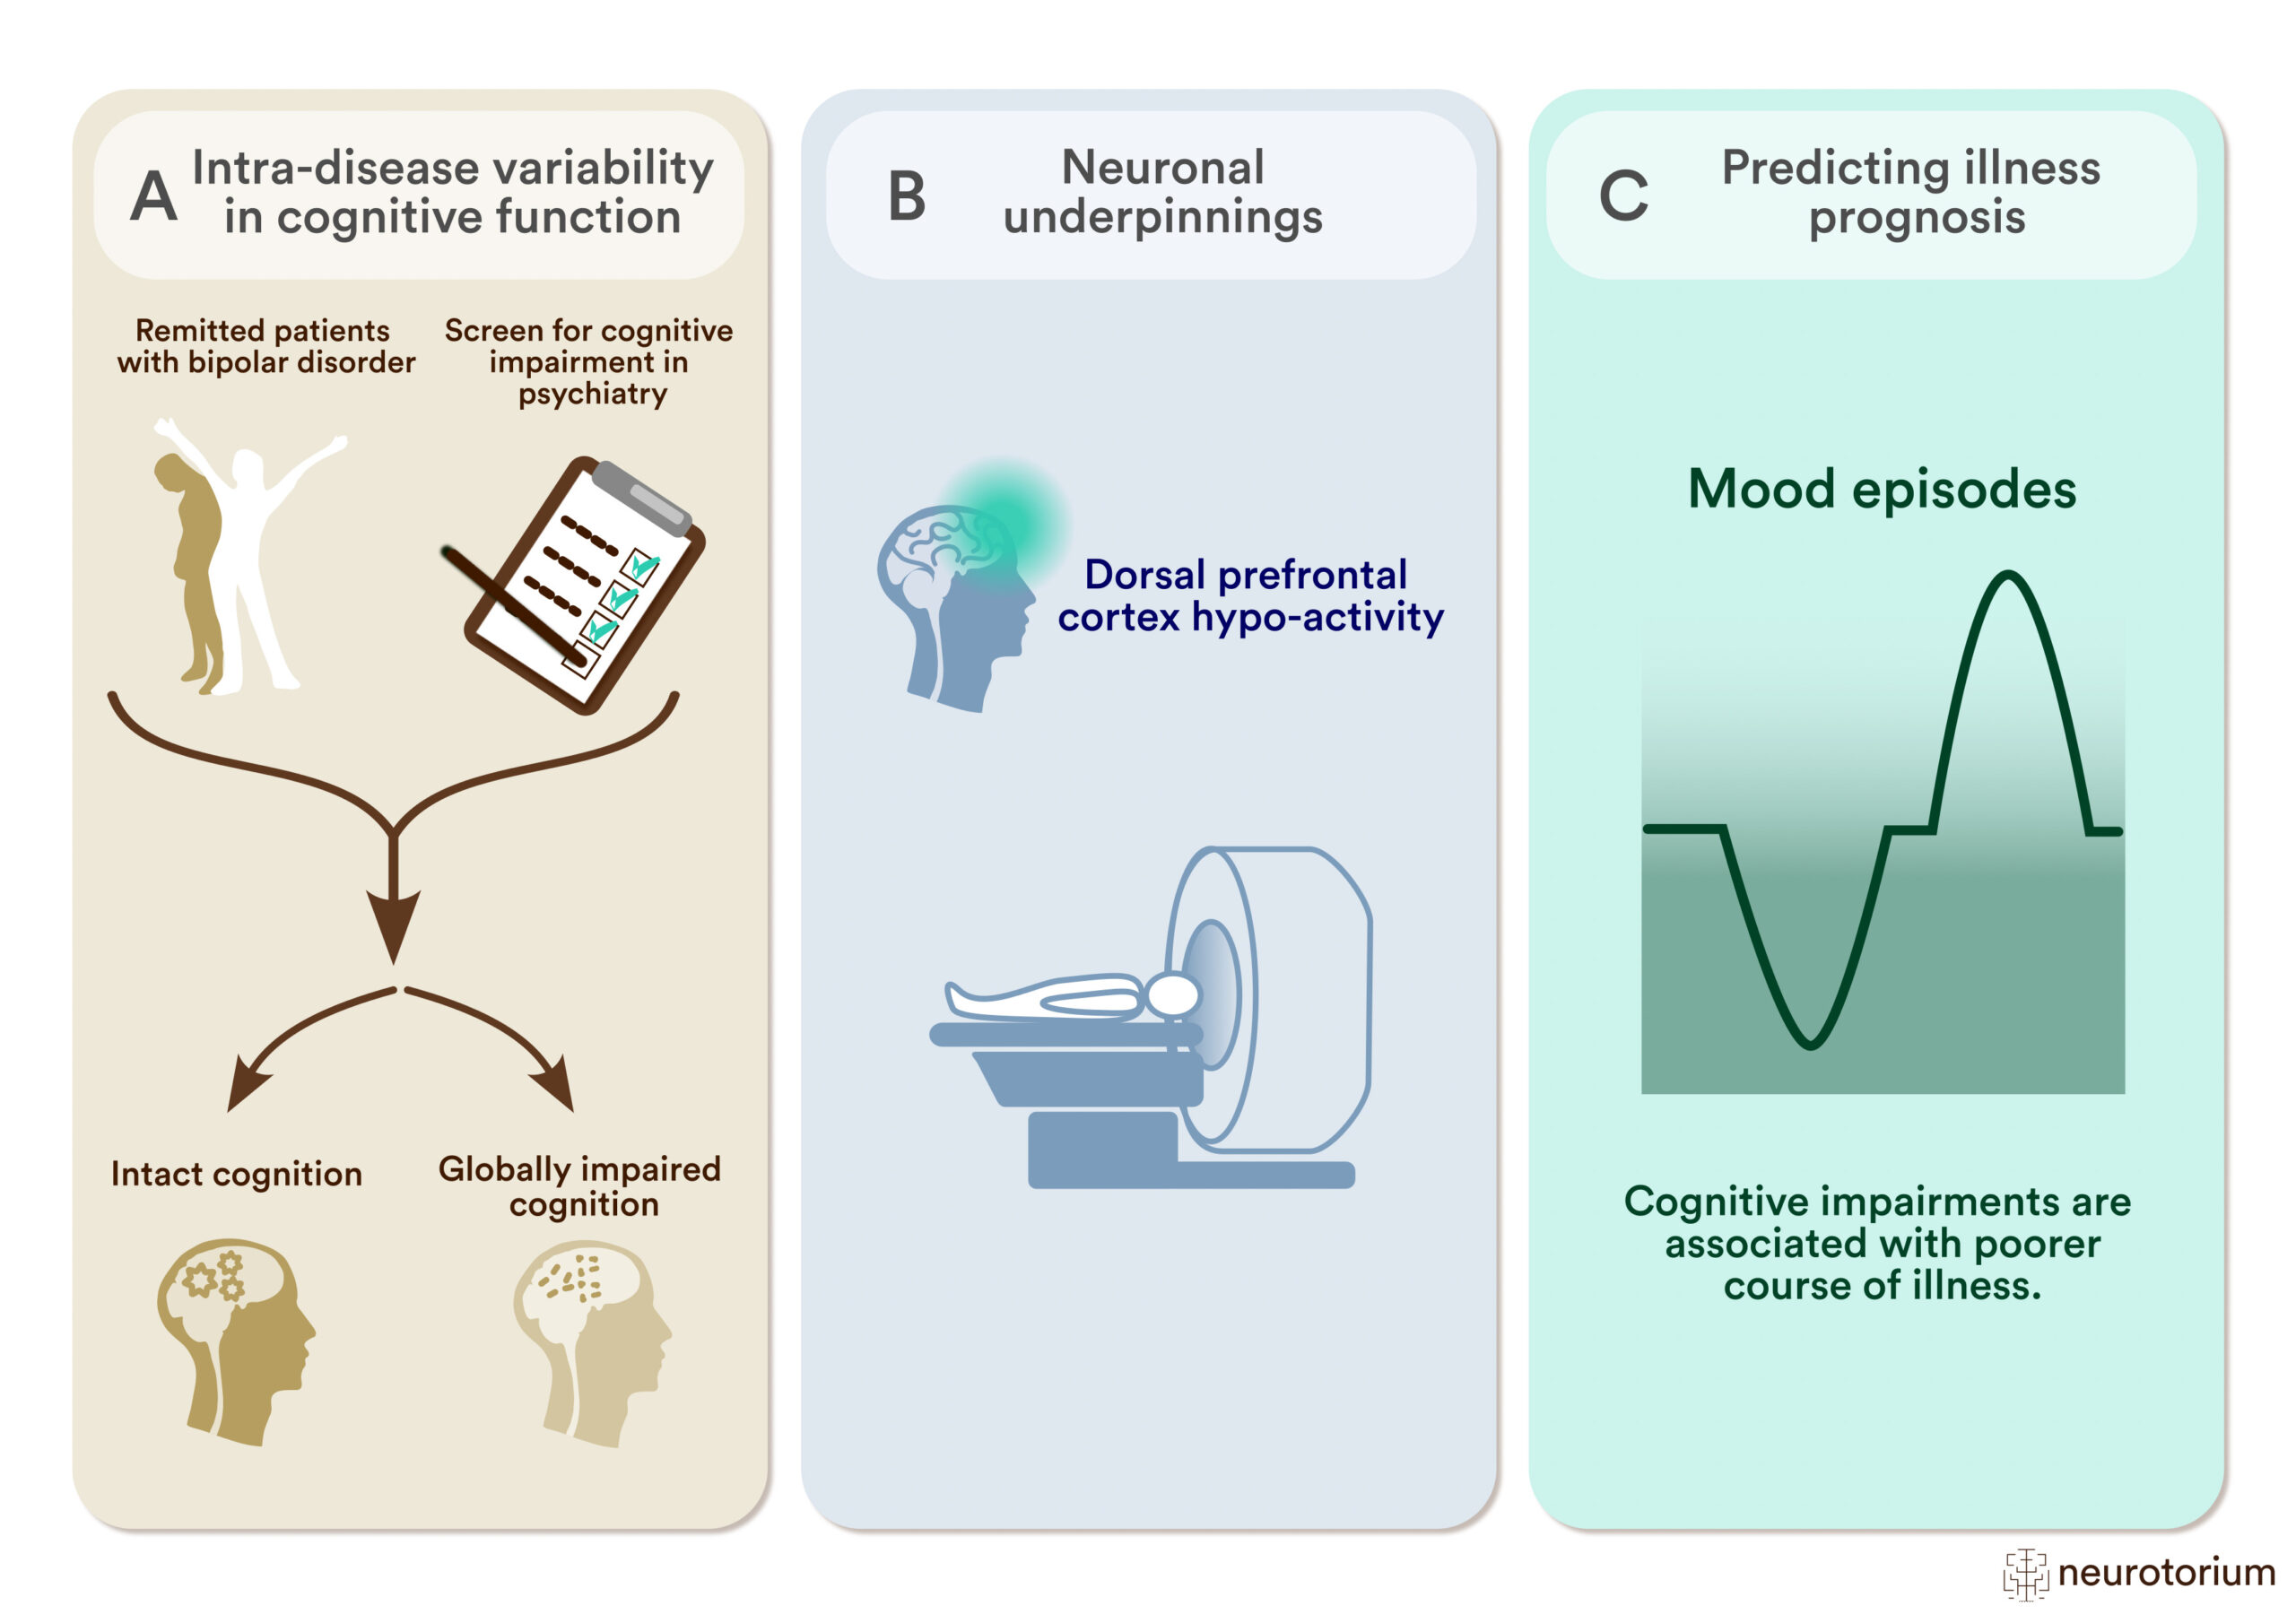 Studying Cognitive Impairment and its Neuronal Underpinnings to Predict Illness Prognosis in Bipolar Disorder